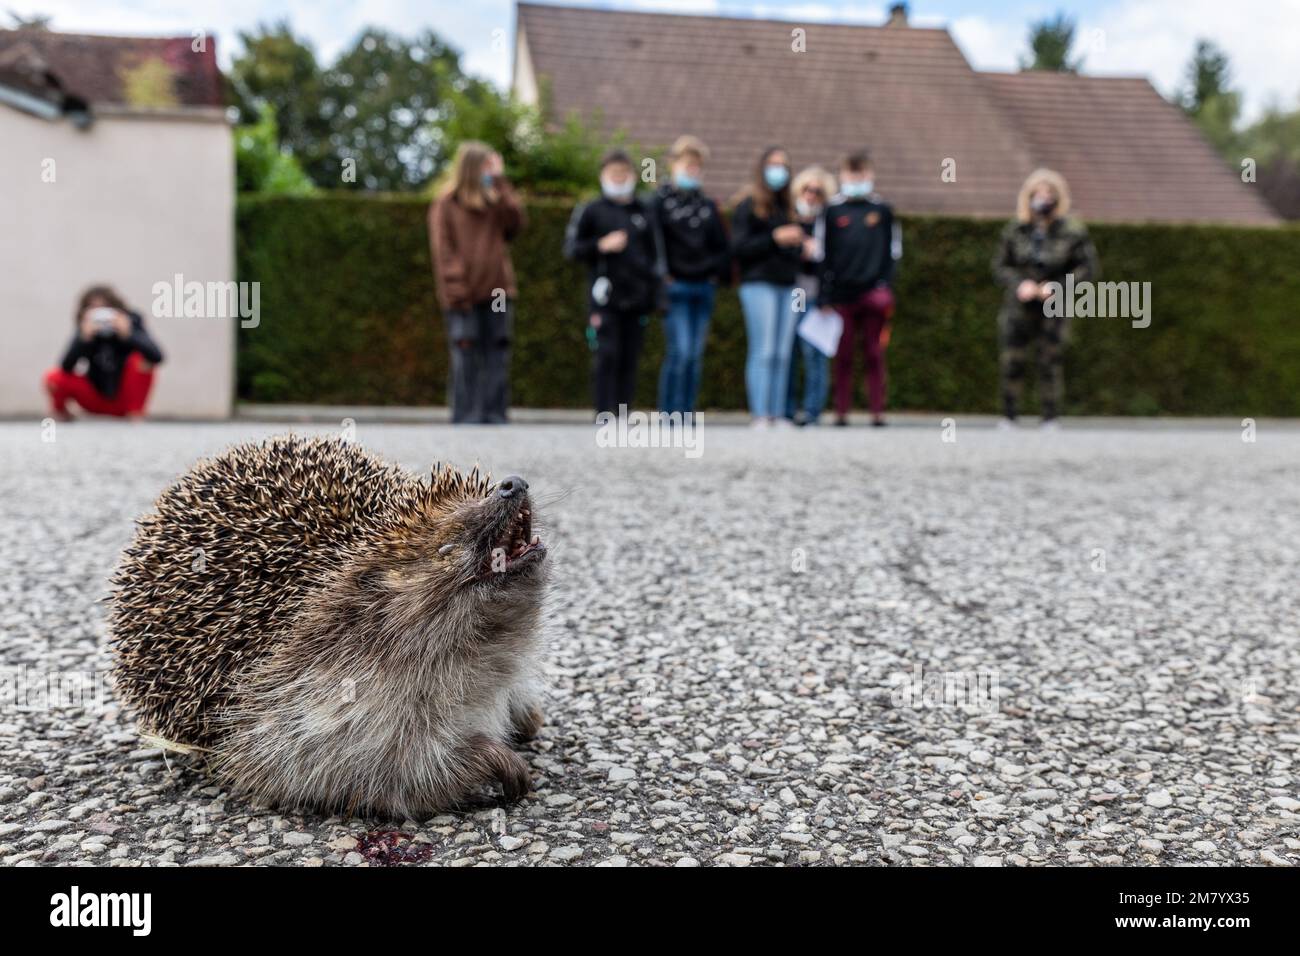 STUDENTS LOOKING AT A HEDGEHOG THAT HAS BEEN RUN OVER BY A CAR ON THE ROAD, RUGLES, EURE, NORMANDY, FRANCE Stock Photo